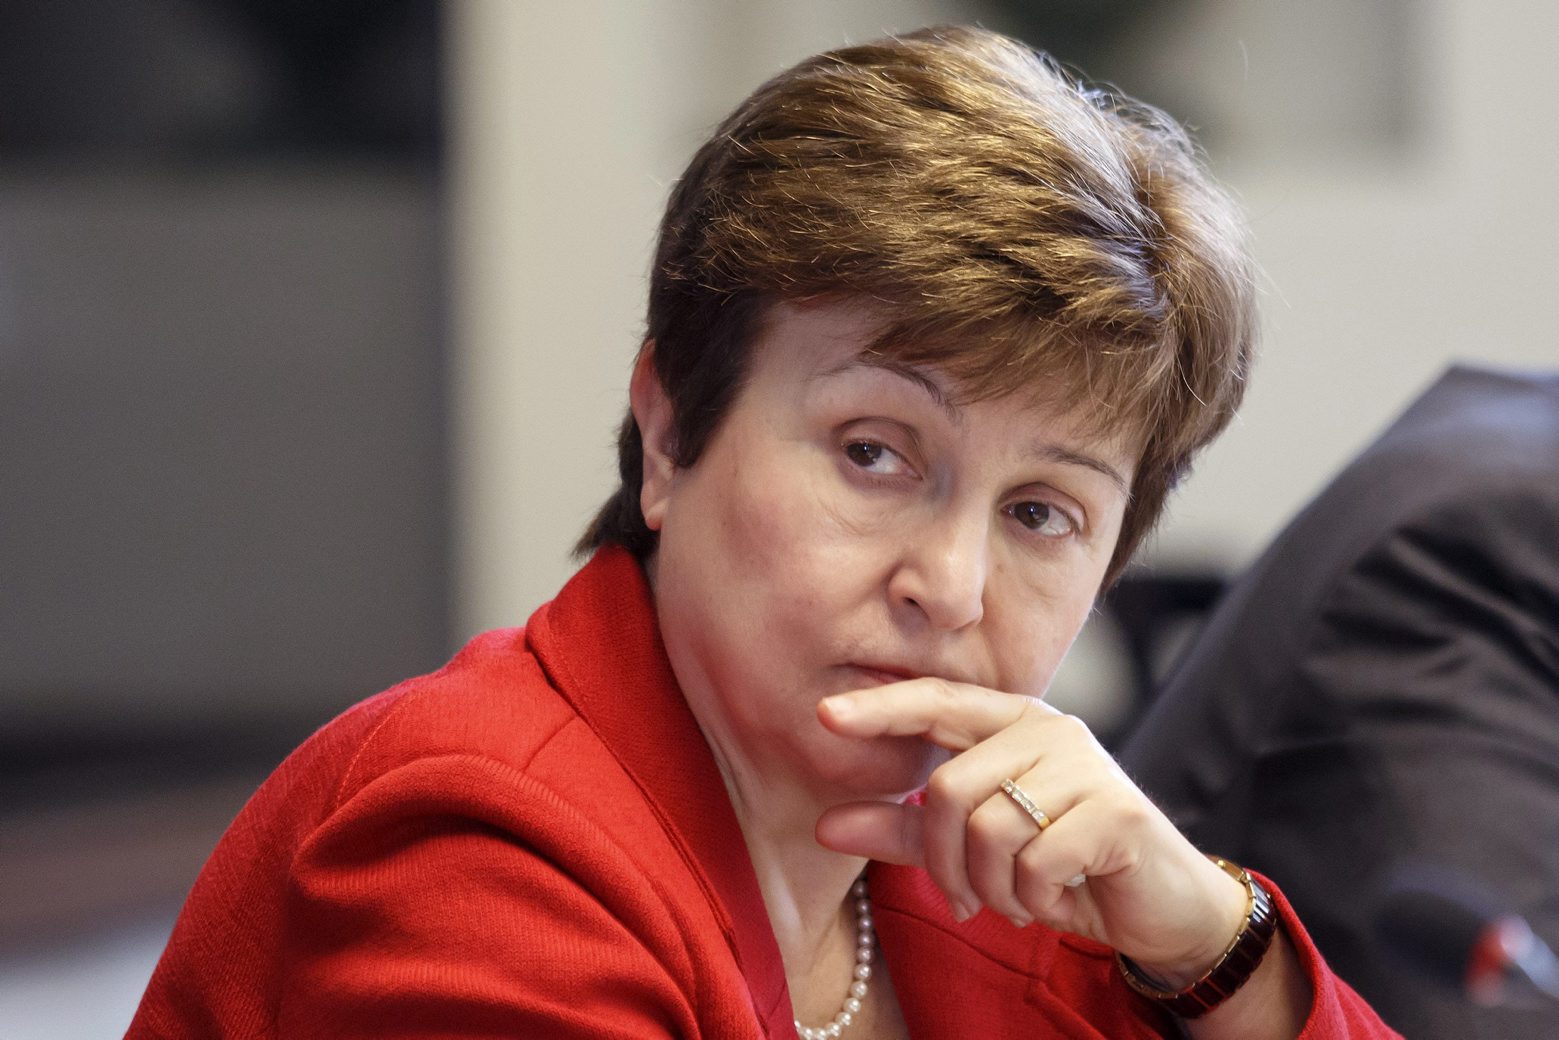 epa07754437 (FILE) - World Bank Chief Executive Officer Kristalina Georgieva listens to a speech at the European headquarters of the United Nations in Geneva, Switzerland, 07 March 2018 (reissued 03 August 2019). EU ministers meeting in Paris on 02 August 2019 selected Bulgaria's Kristalina Georgieva as the candidate to head the International Monetary Fund.  EPA/SALVATORE DI NOLFI (FILE) SWITZERLAND EU IMF CHIEF